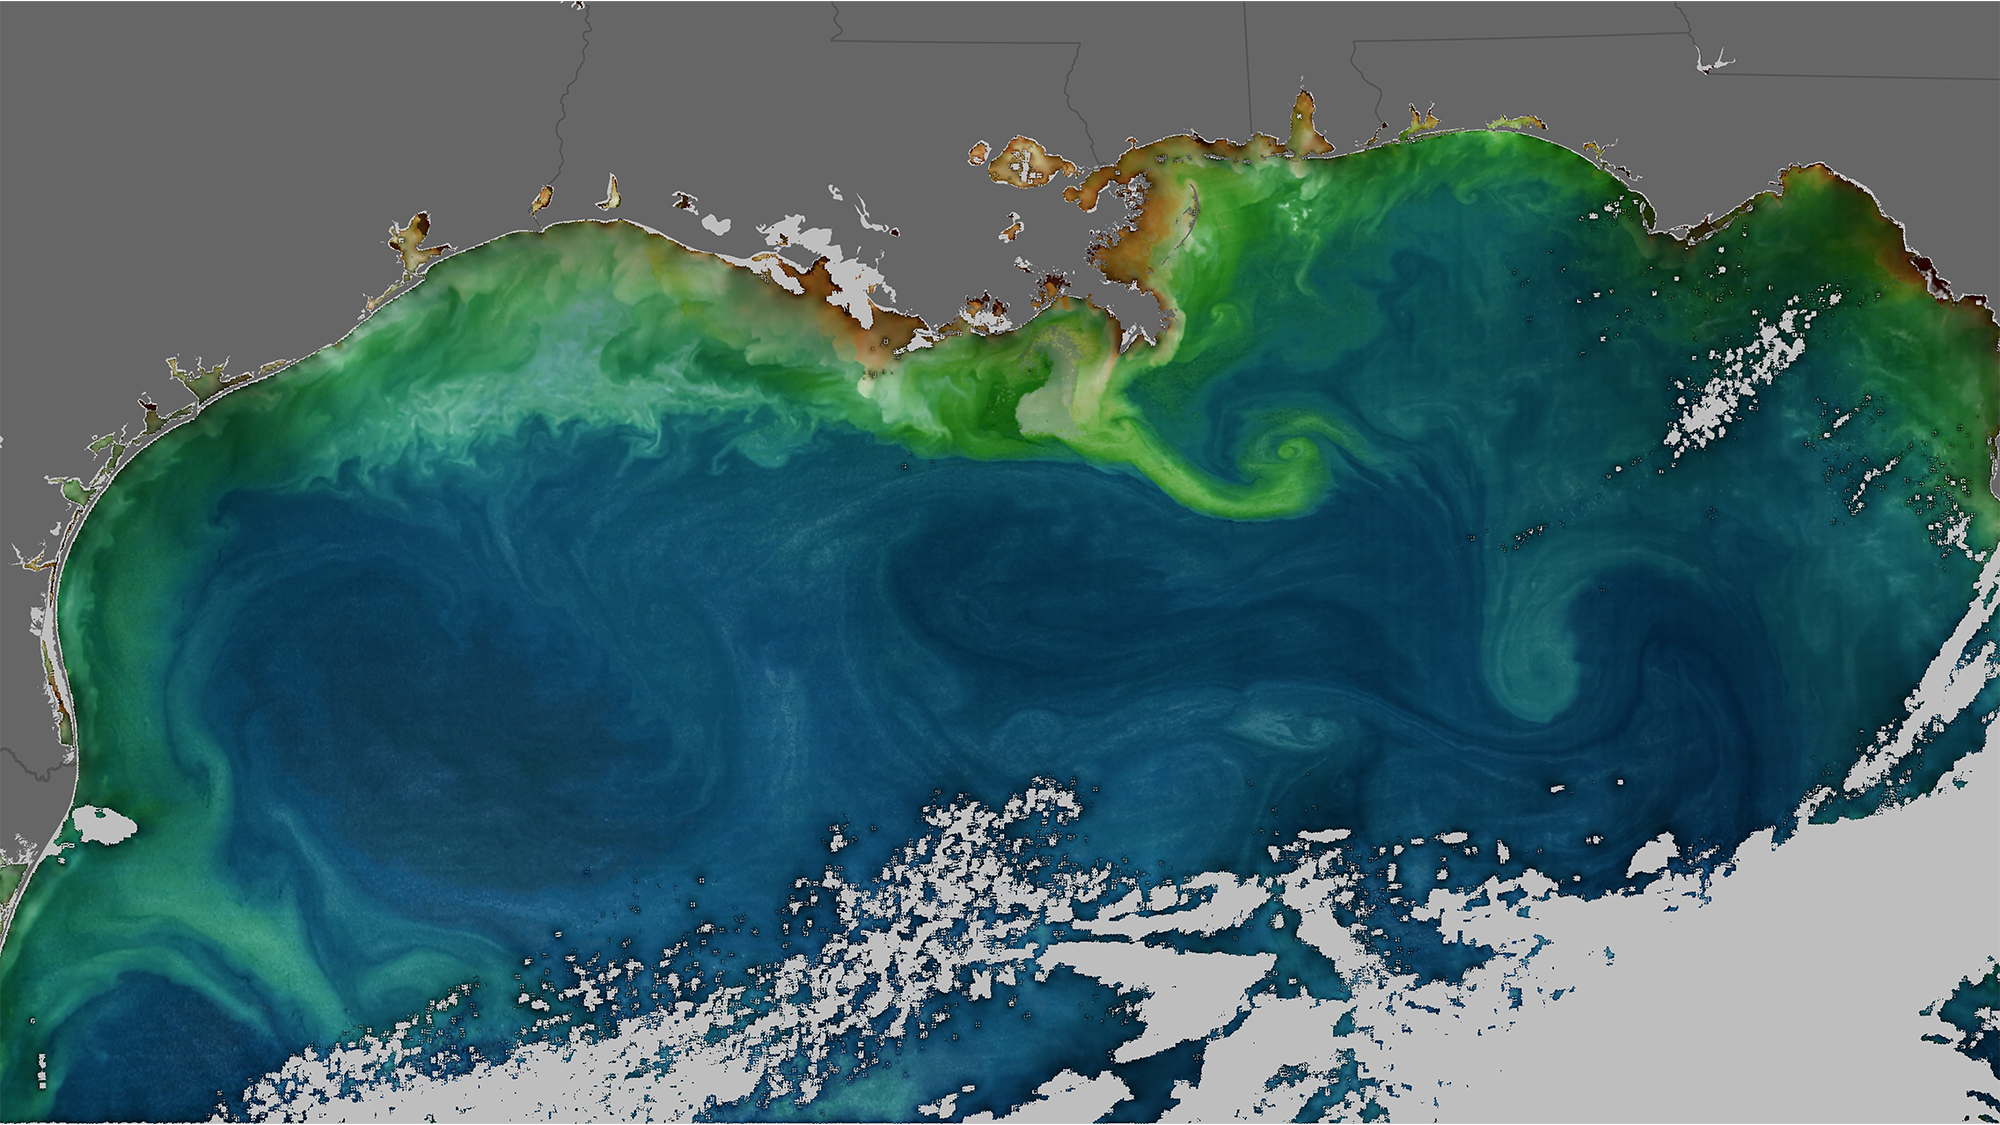 Local climate modify has an effect on ocean coloration